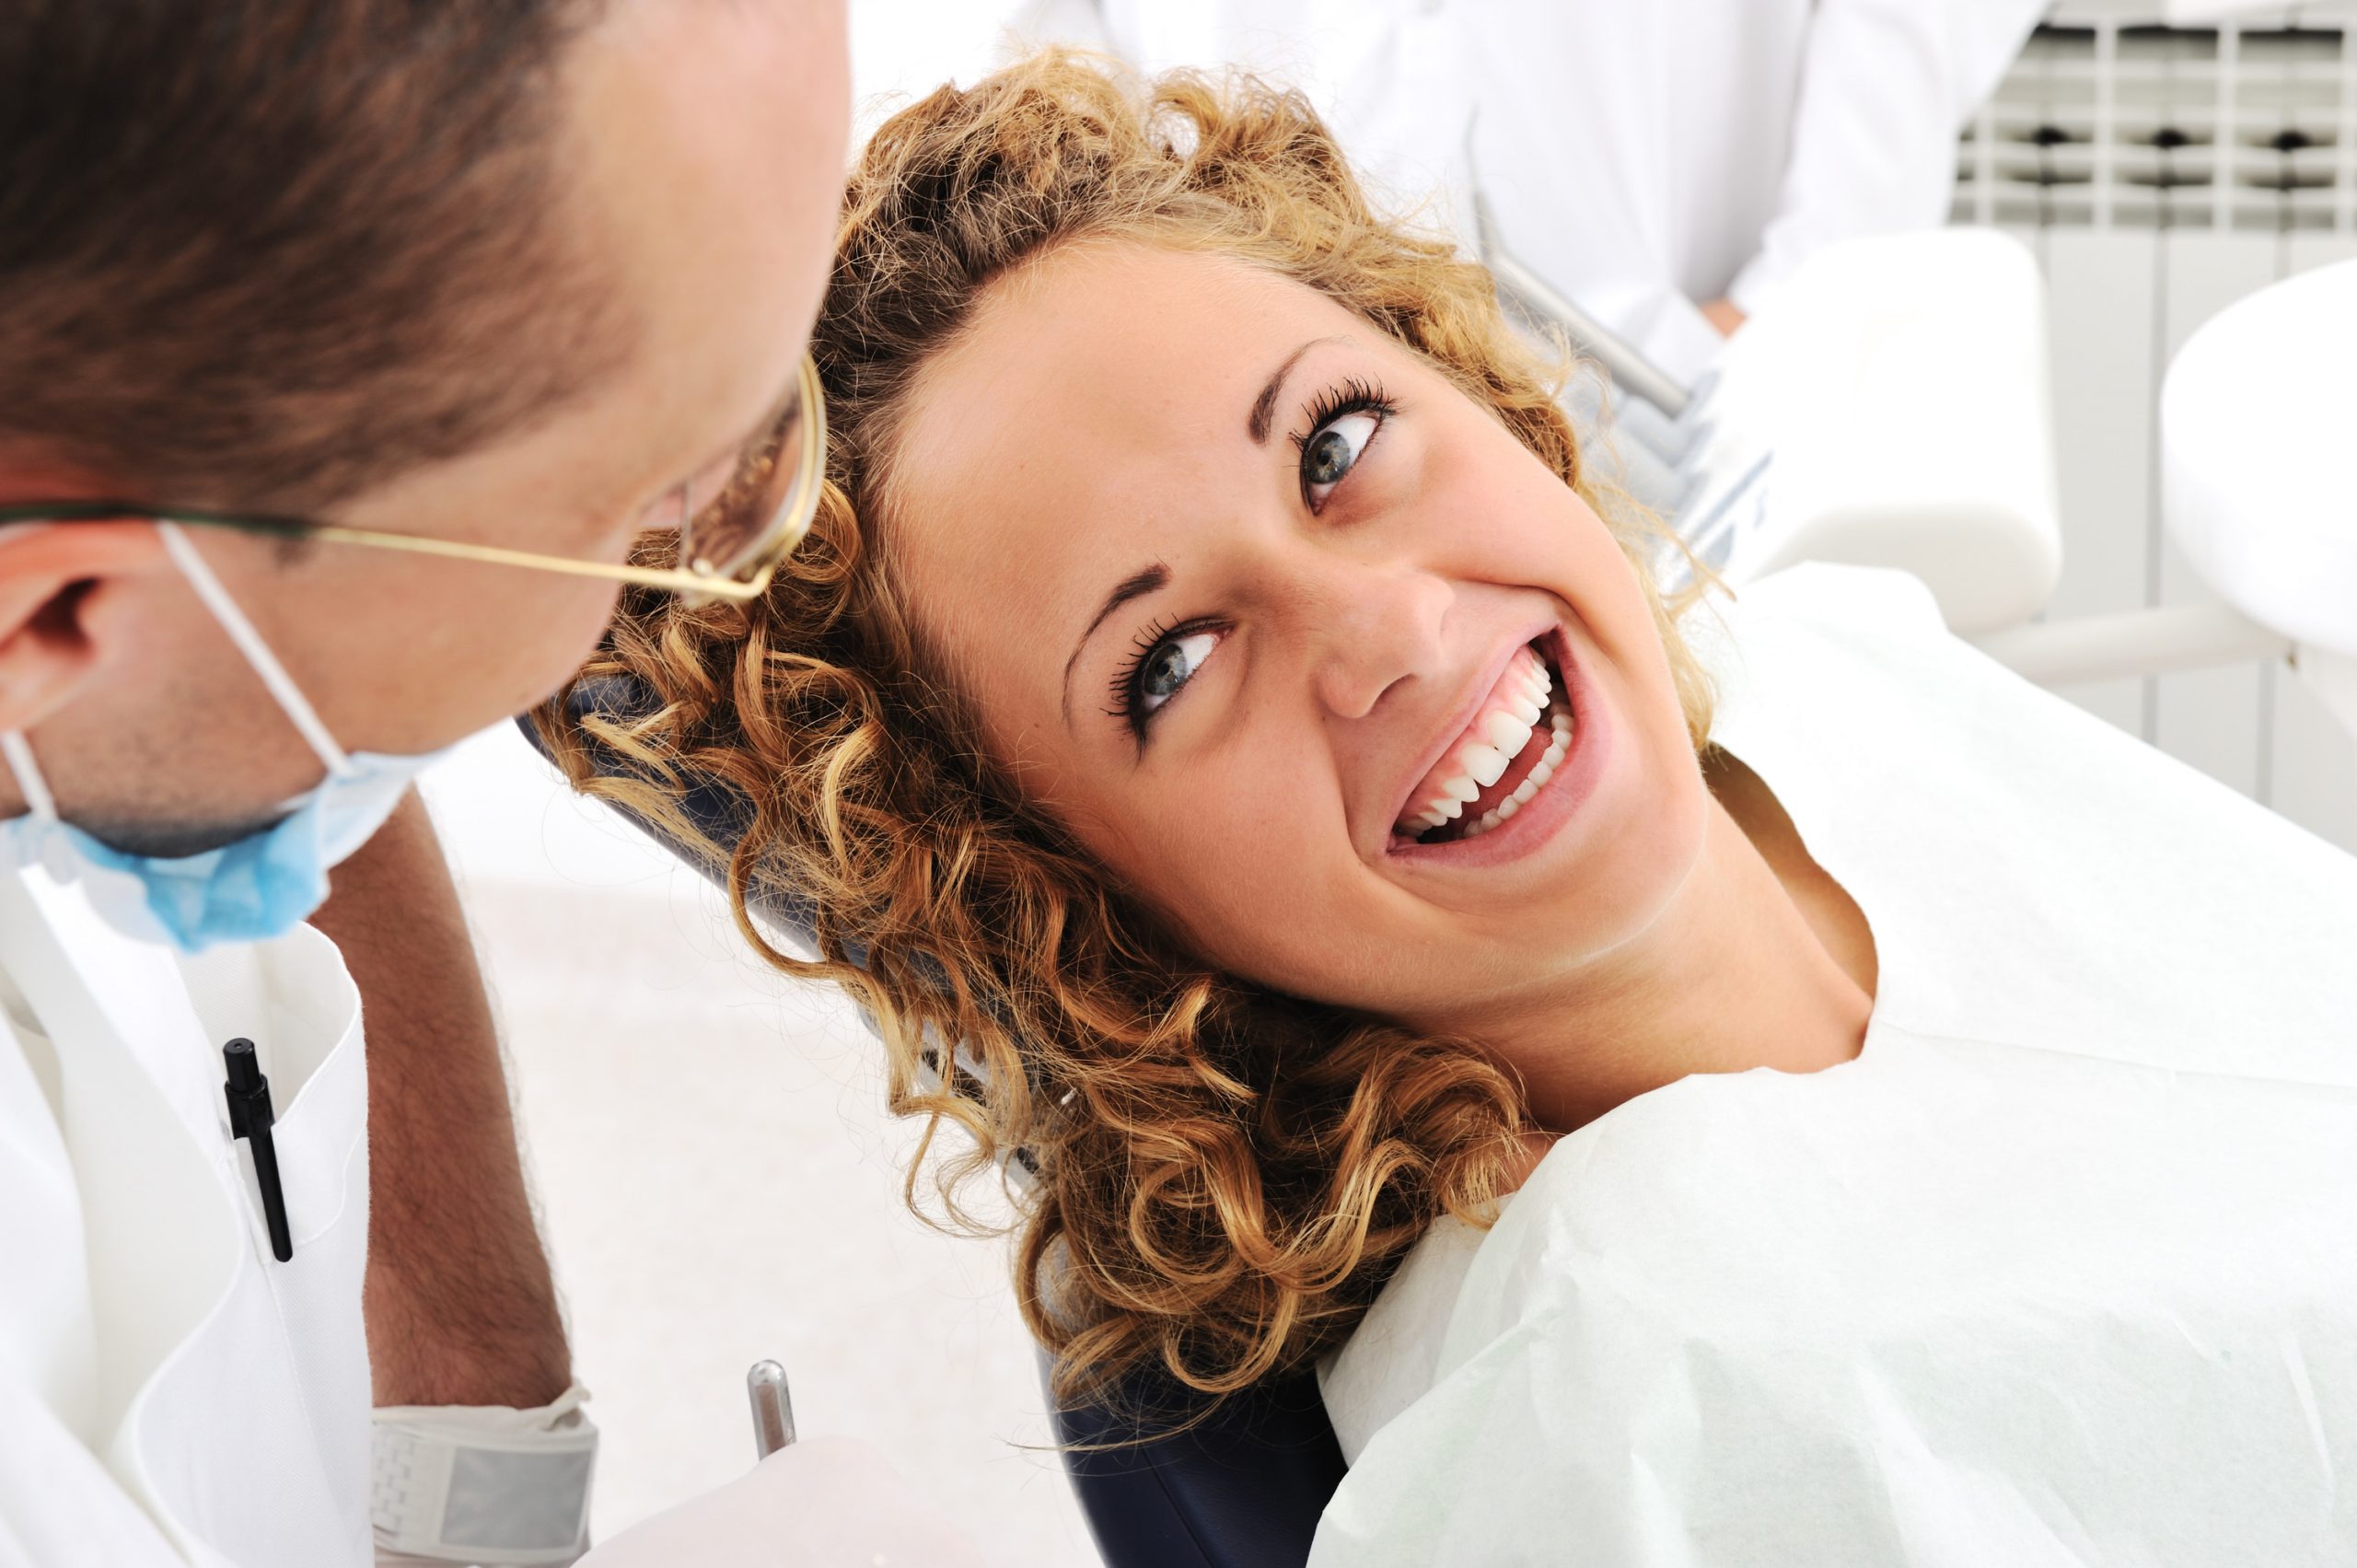 what should i expect from an established family dentist office